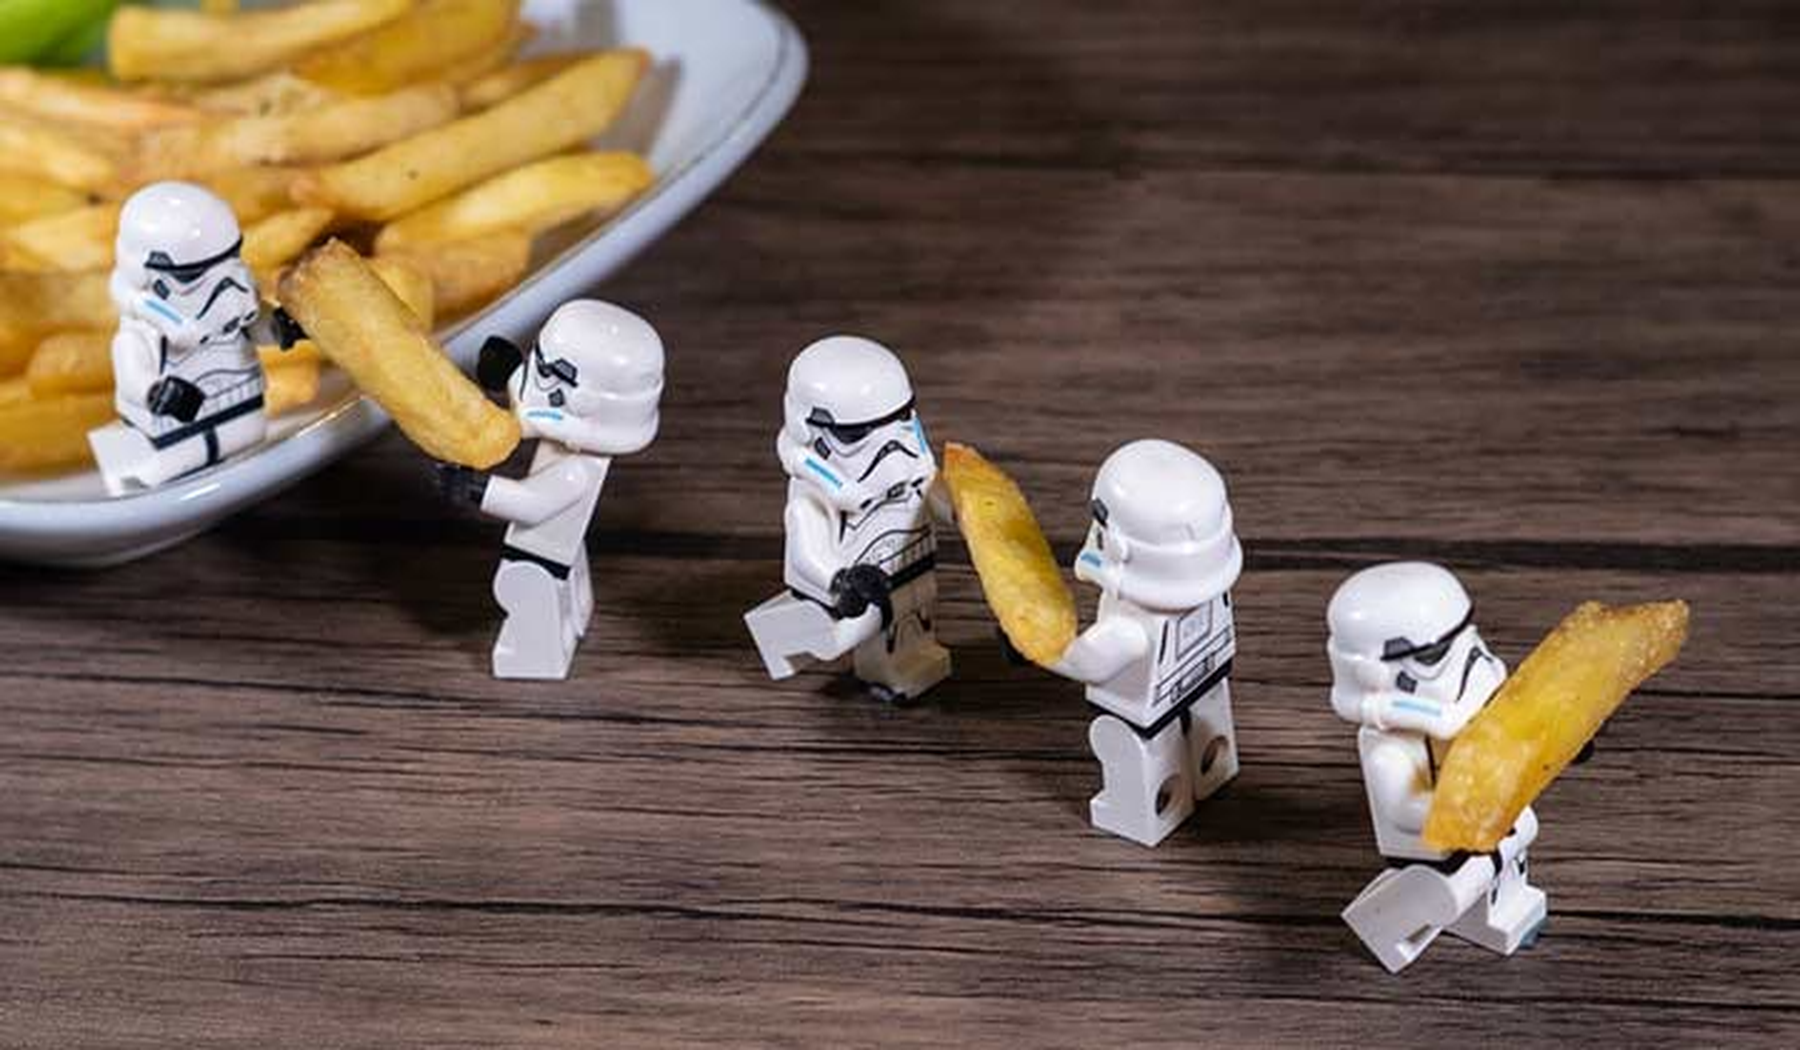 Stormtrooper figures carrying french fries